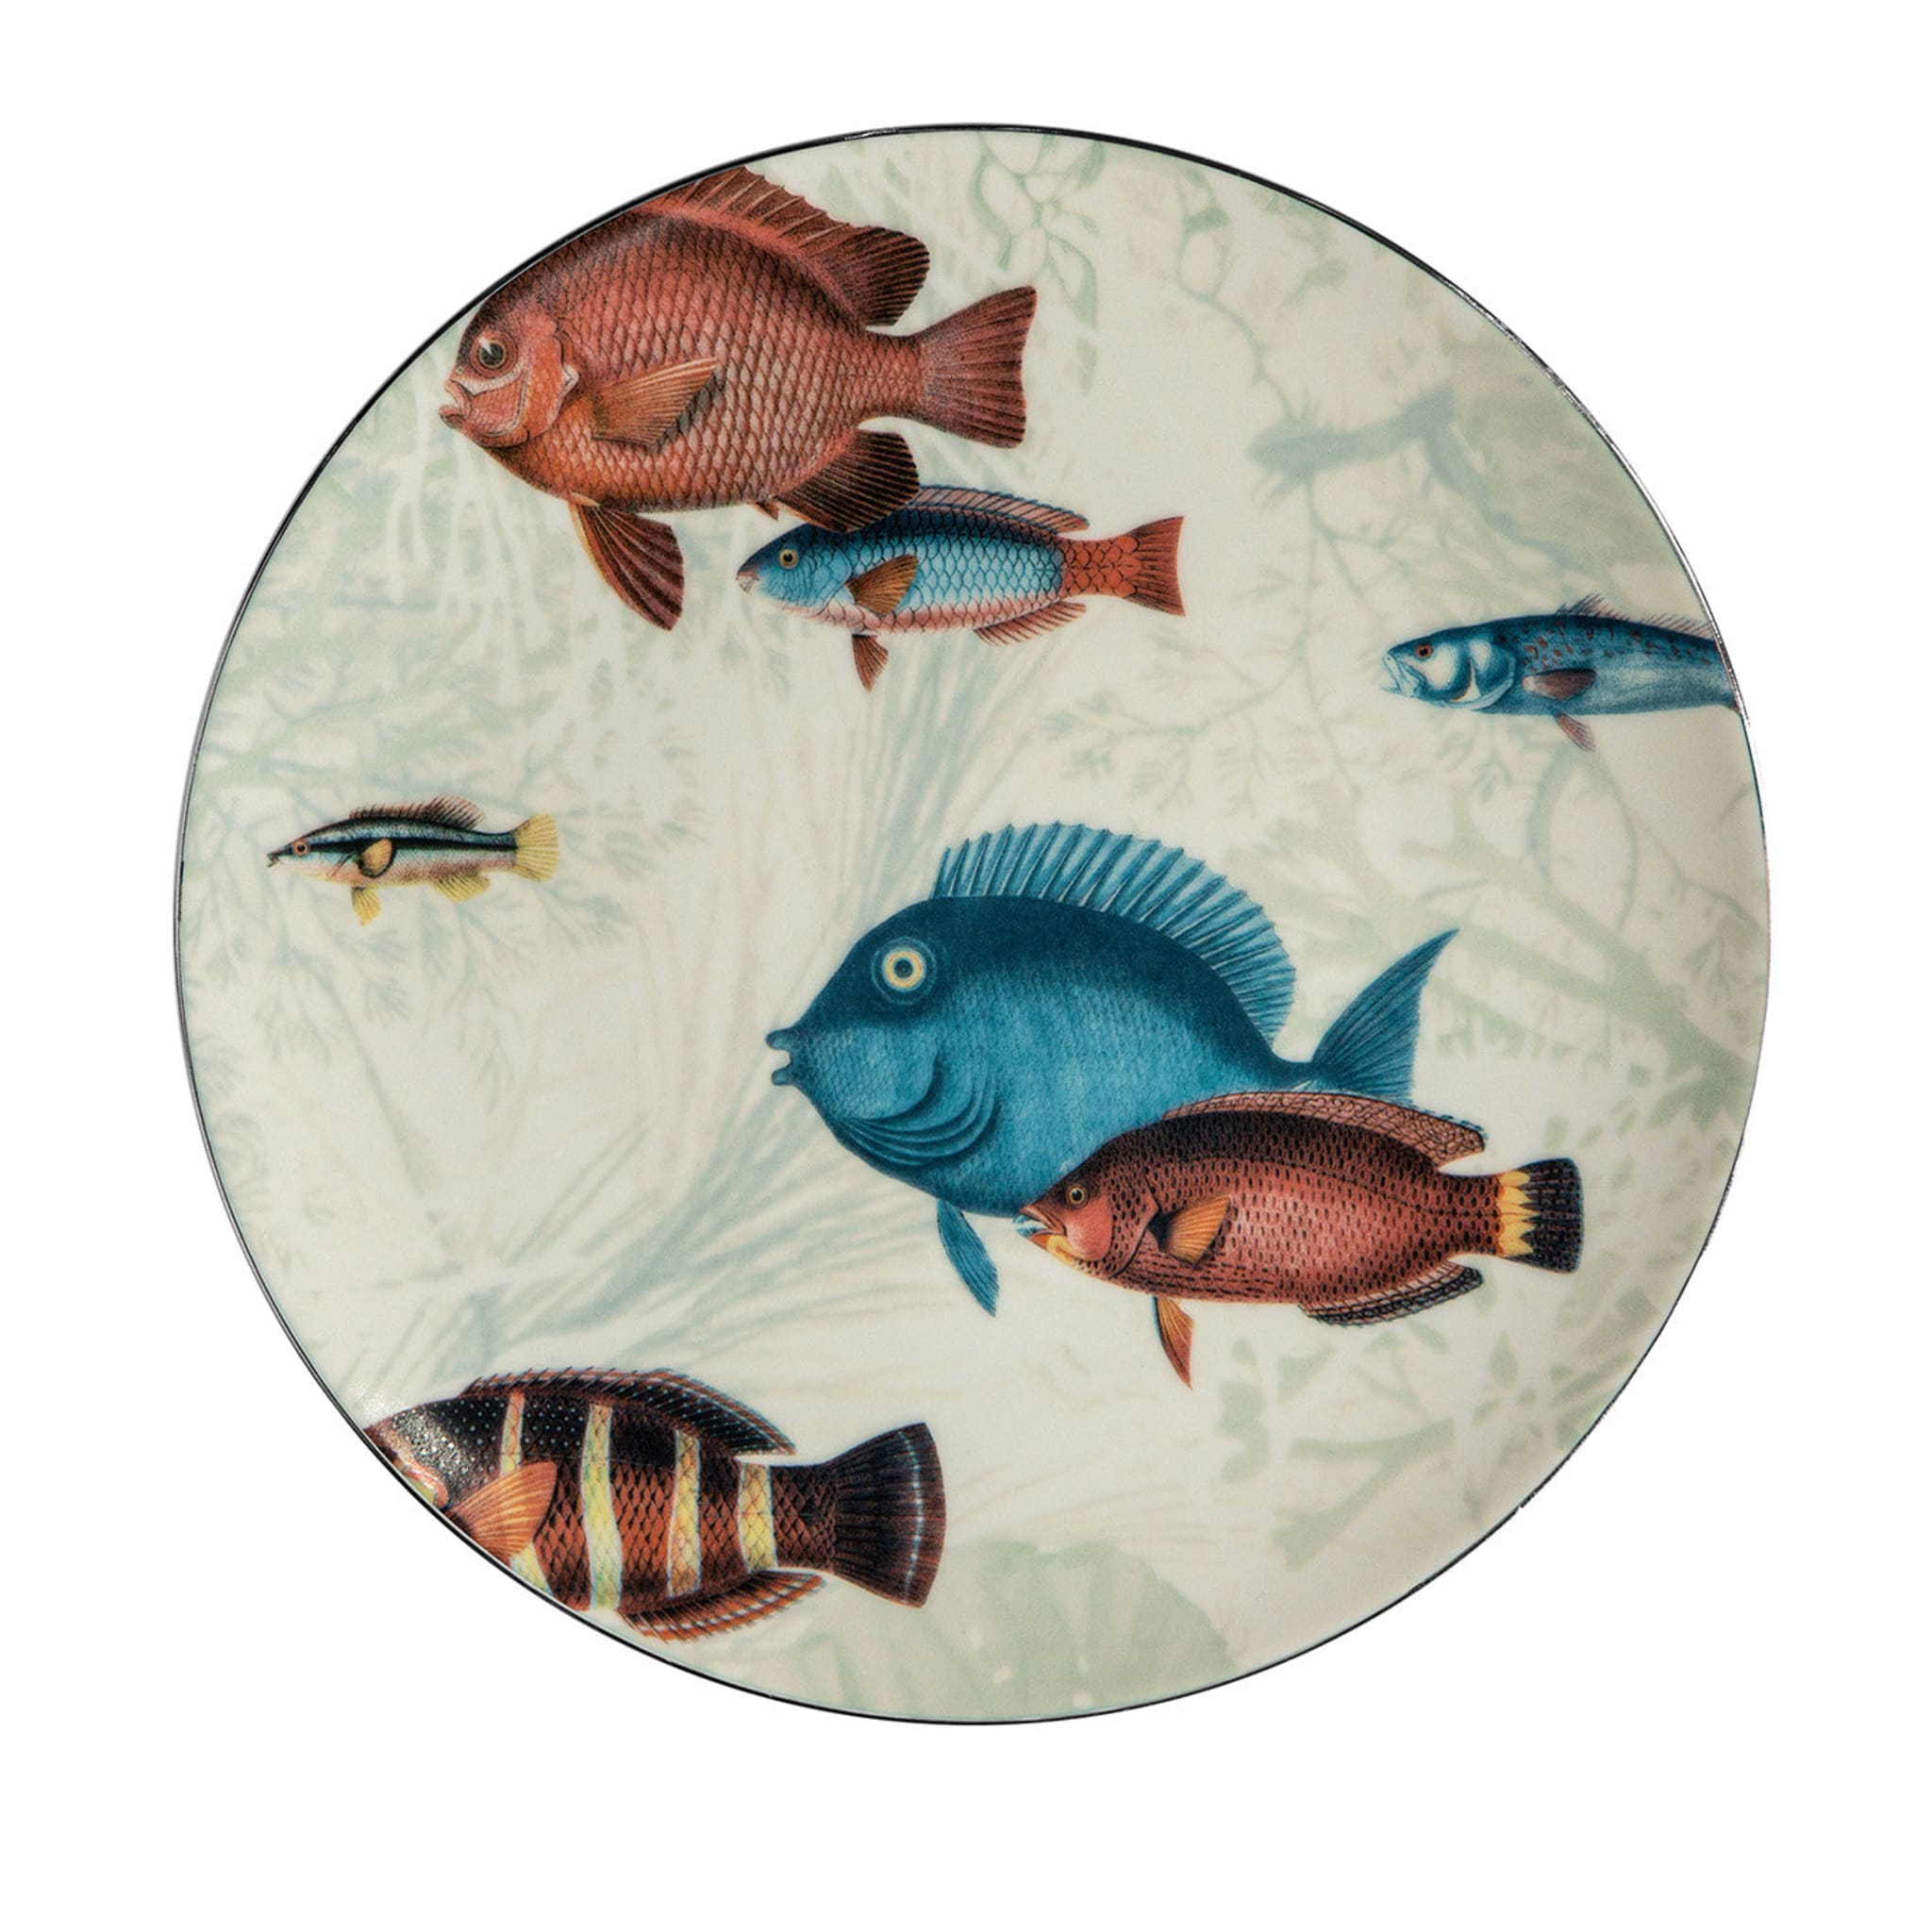 Amami Set Of 2 Porcelain Dessert Plates With Tropical Fish #1 - Main view